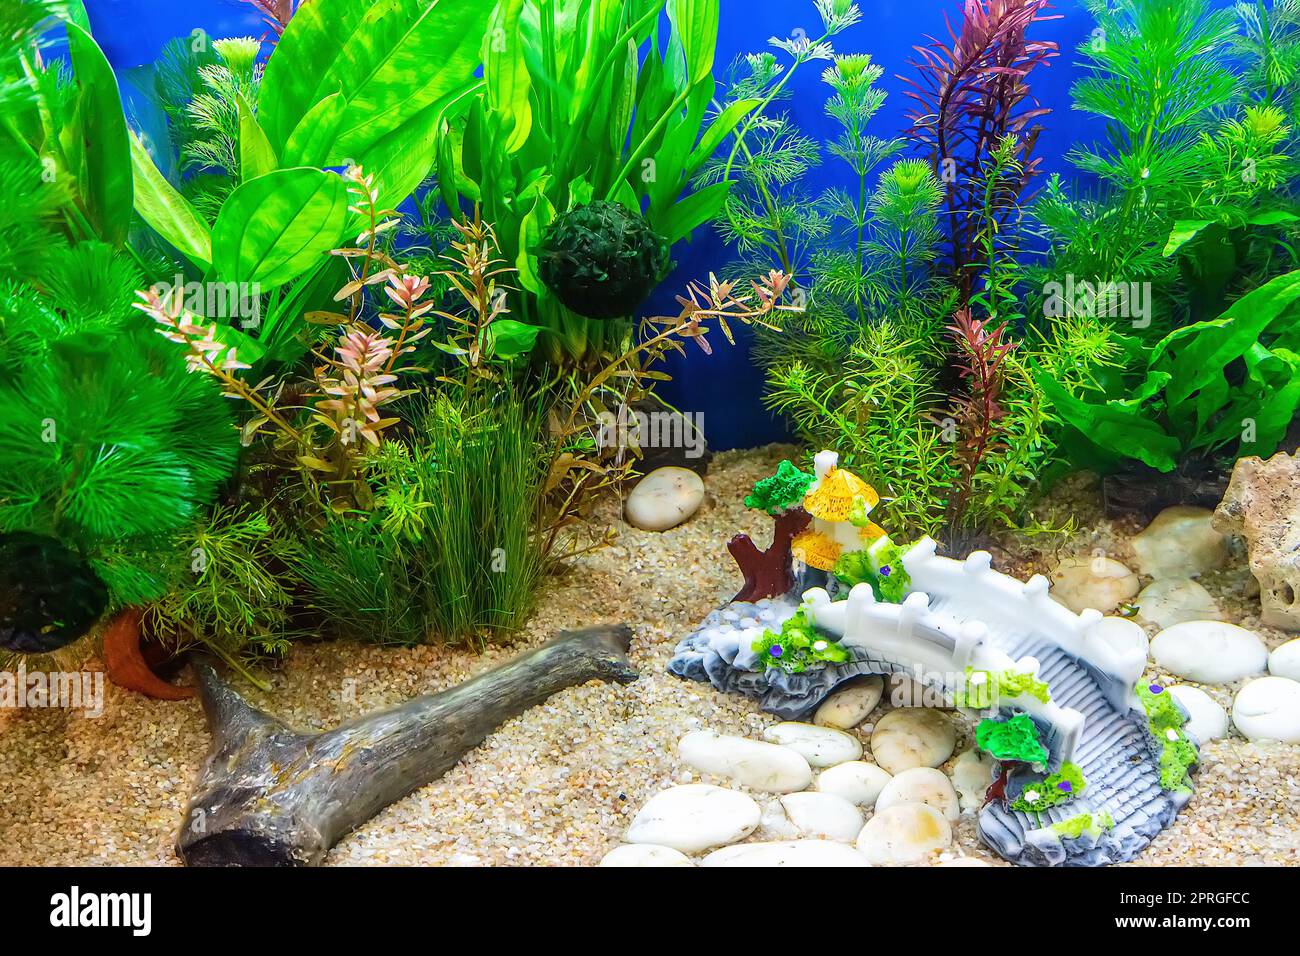 Underwater landscape nature forest style aquarium tank with a variety of  aquatic plants, stones and herb decorations Stock Photo - Alamy